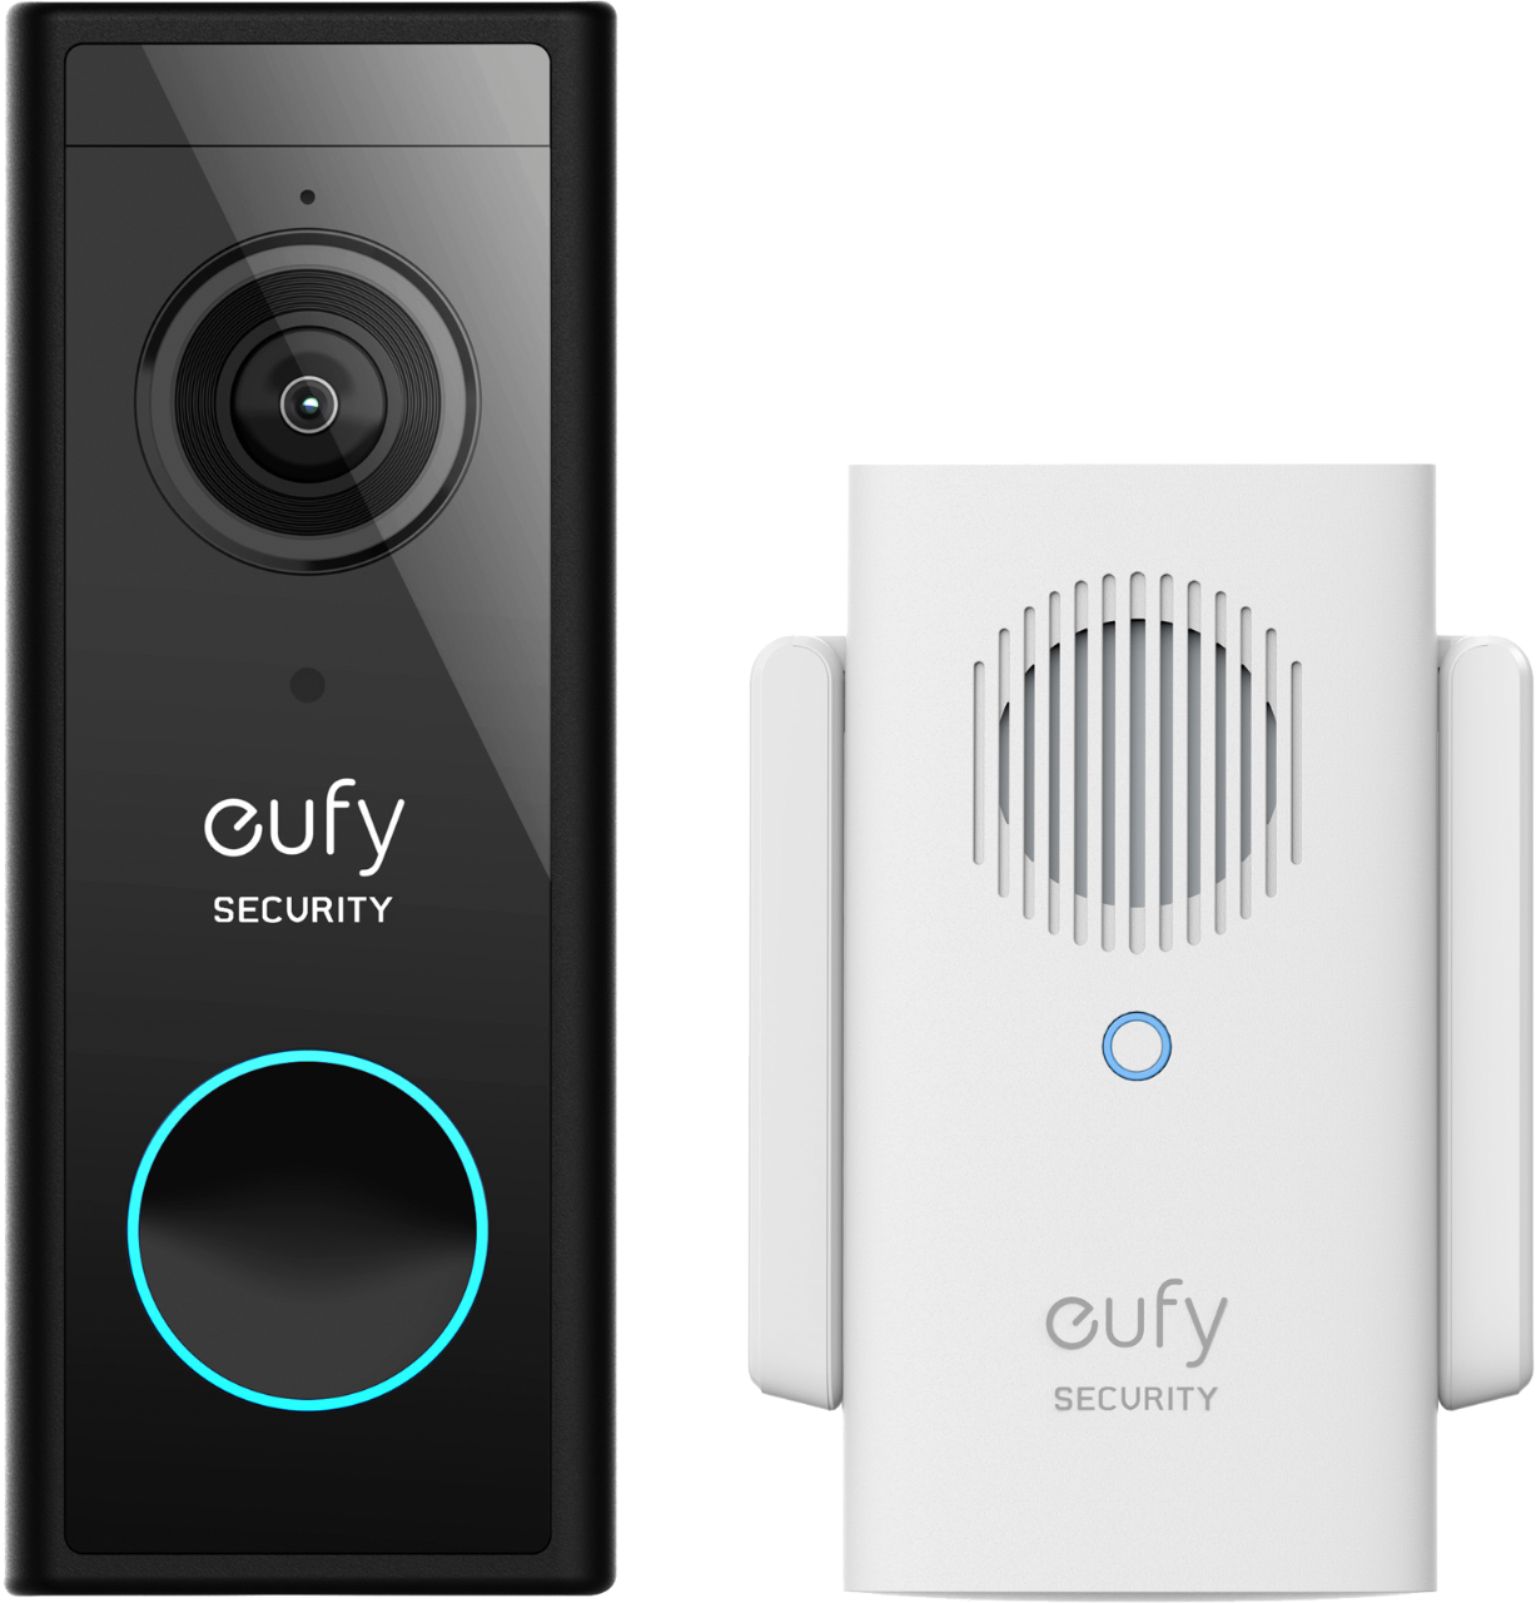 eufy - Smart Wi-Fi 2k Video Doorbell(Battery) w/ Chime - Wired/Battery Operated with Google Assistant and Amazon Alexa $119.99